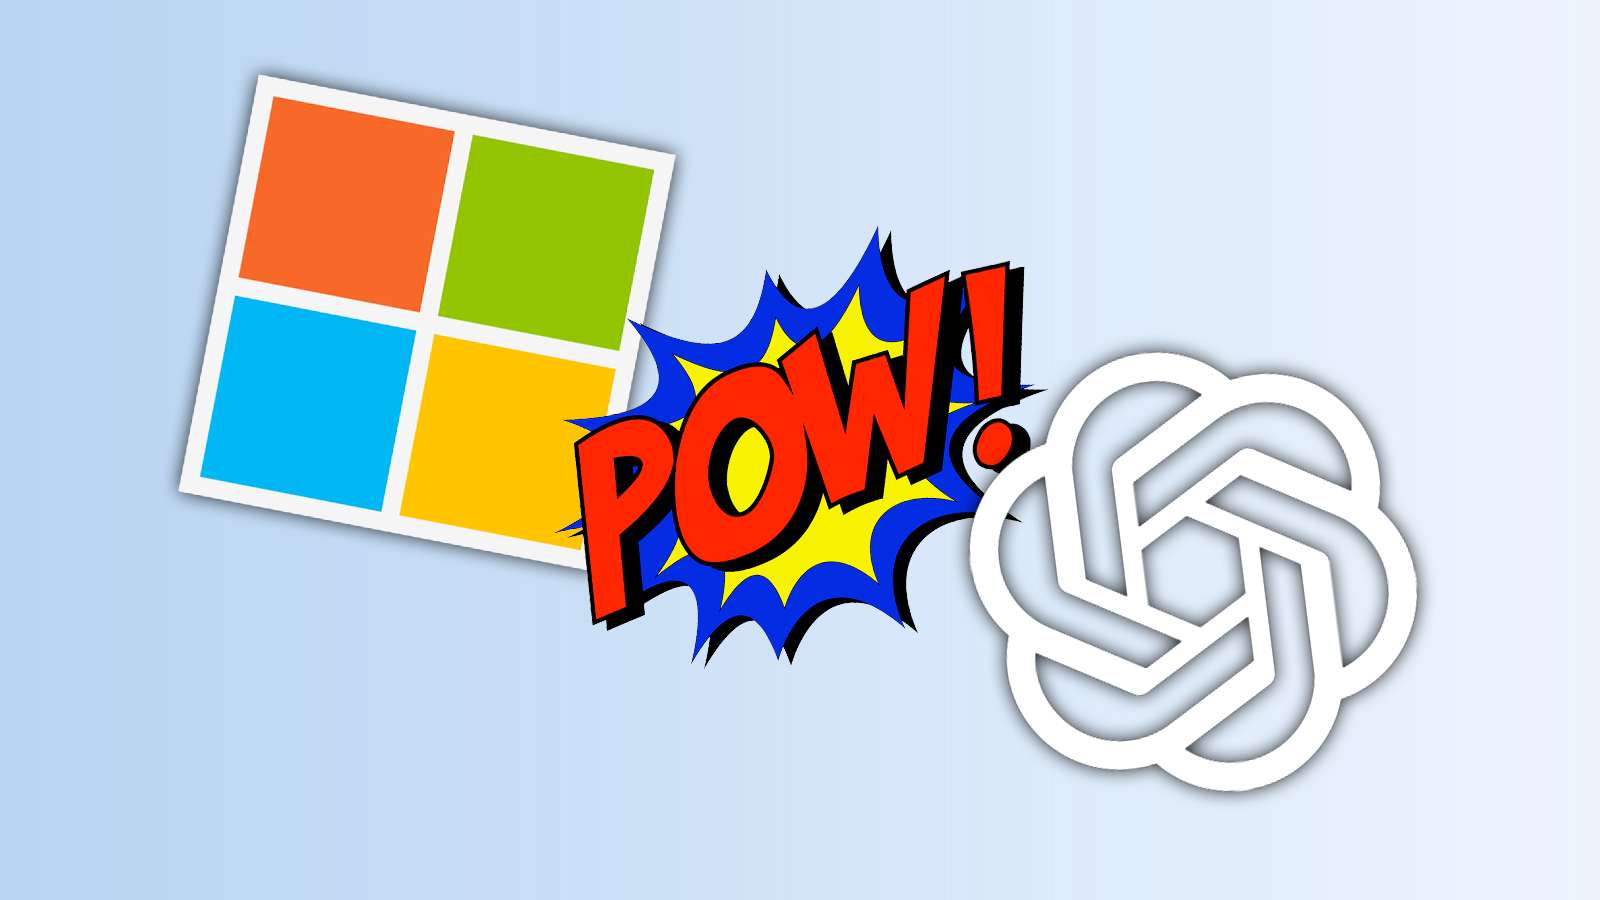 Microsoft and openai logos with a pow in between